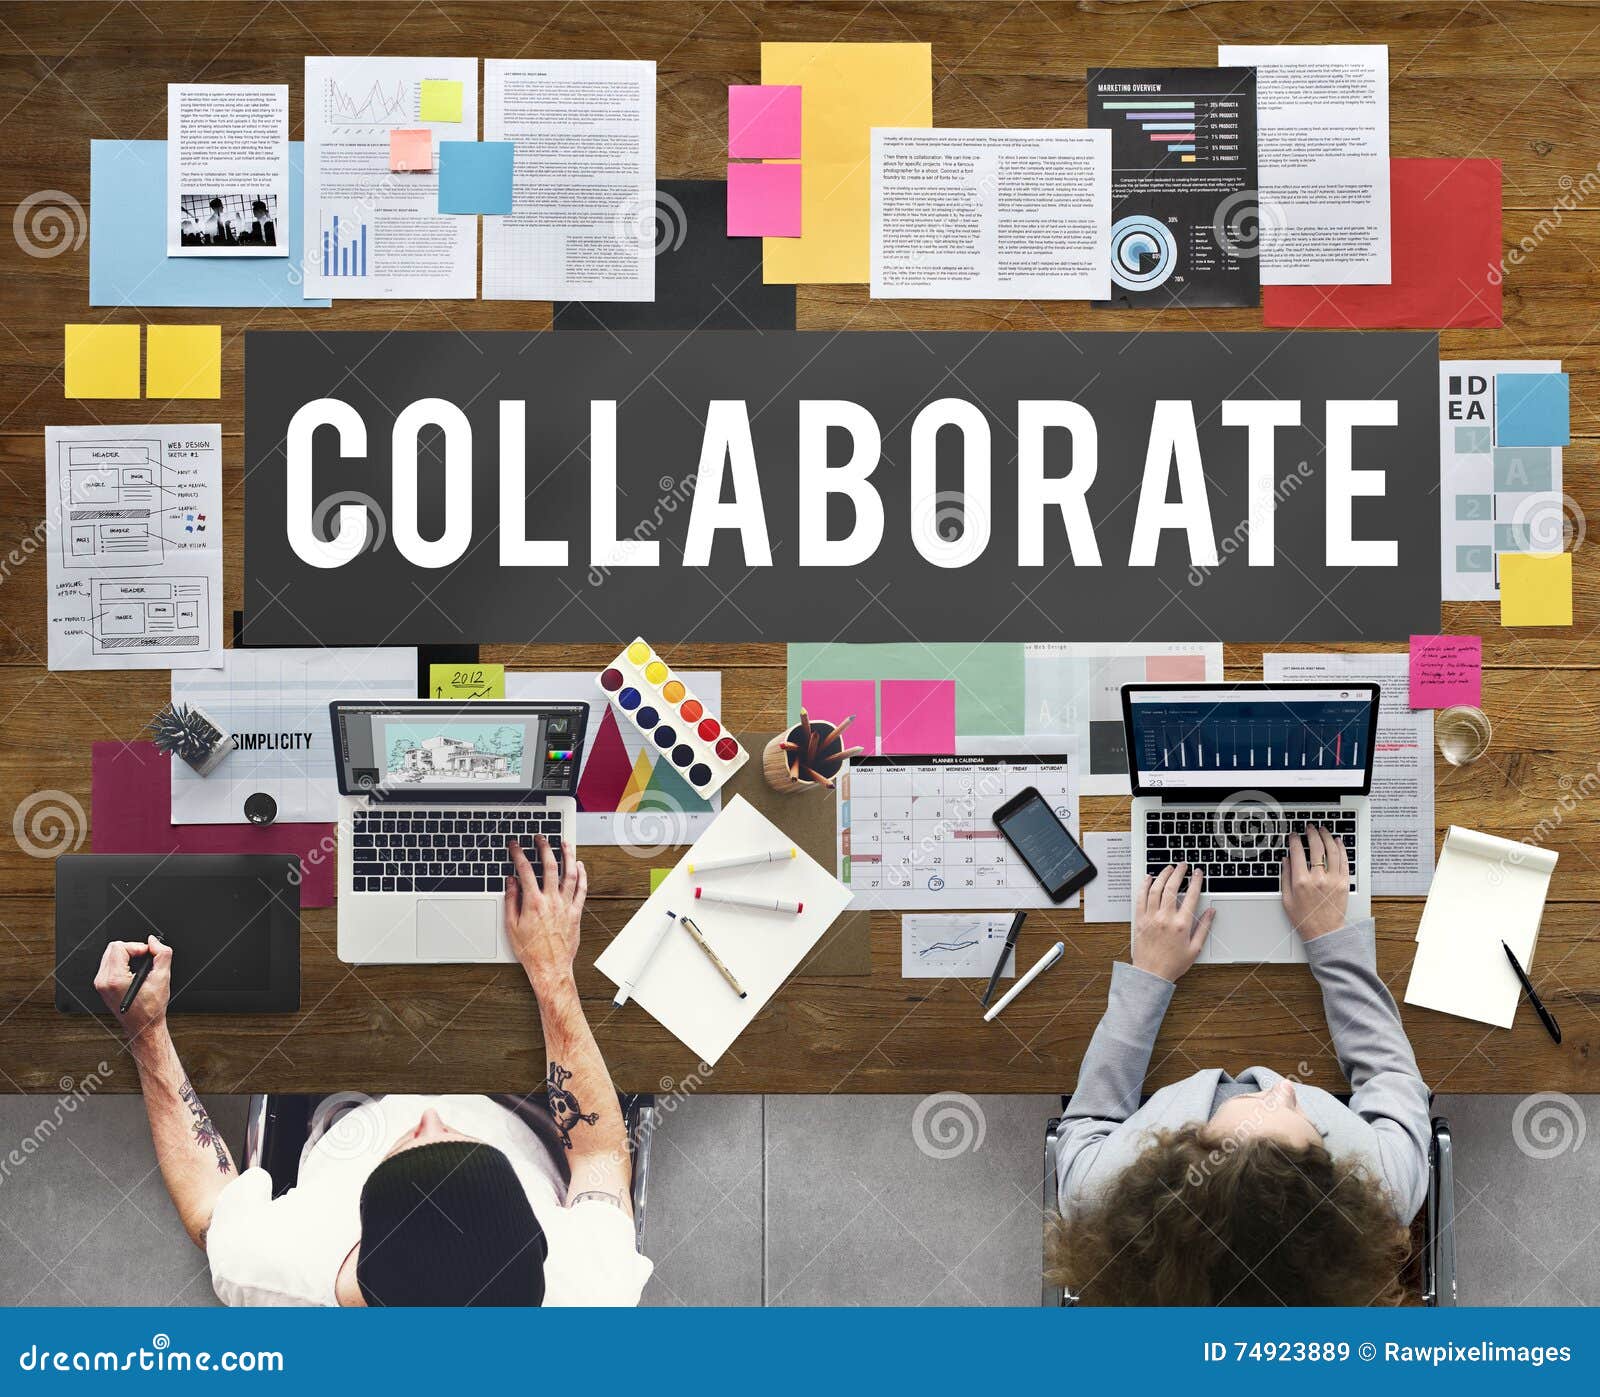 collaborate agreement cooperation partners concept